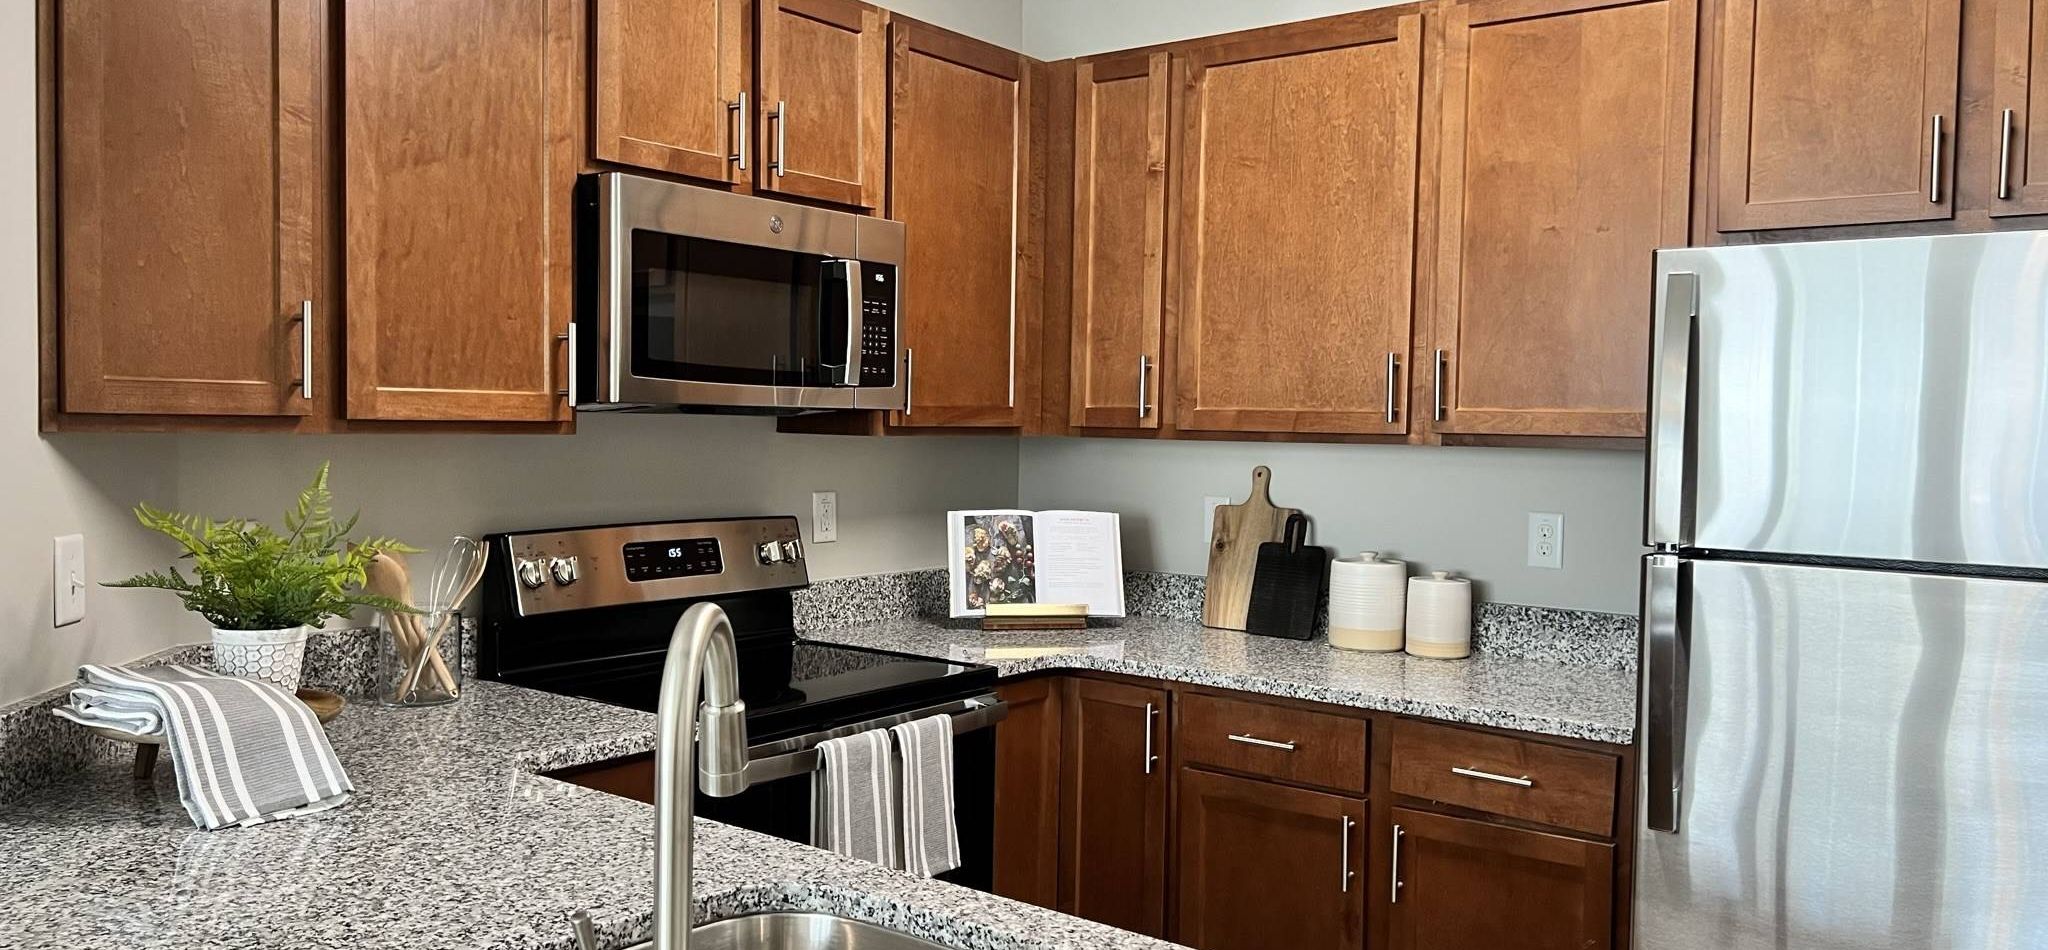 Modern kitchen with granite countertops and stainless steel appliances at Hawthorne at Stillwater, epitomizing luxury apartment living in Sneads Ferry, NC.